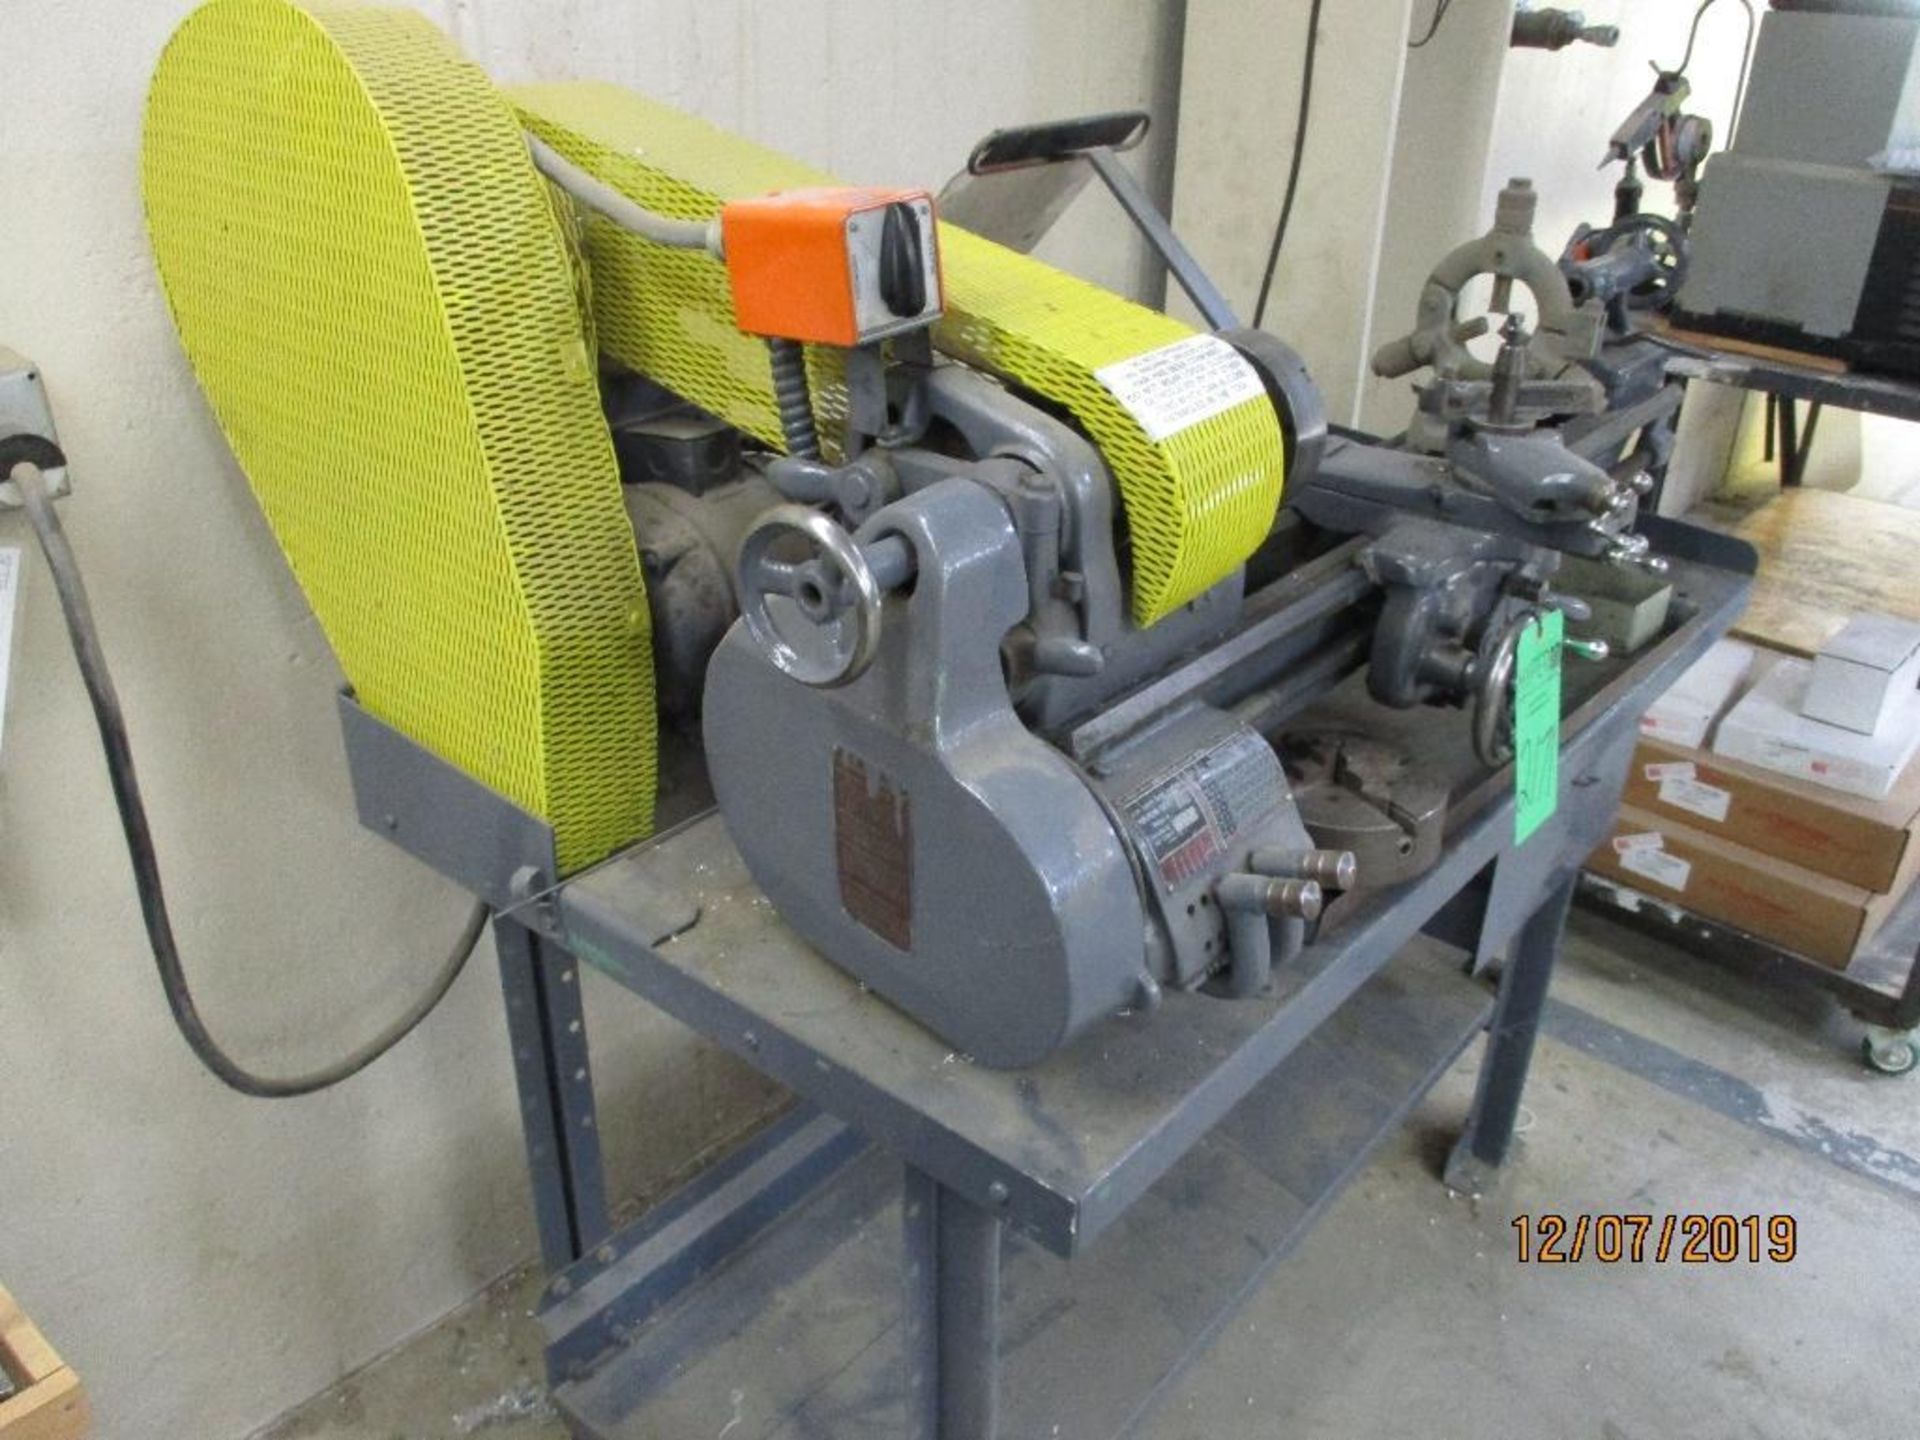 Southbend Precision Lathe With Steady Rest, 9" Swing, 2' Between Centers, 3/4" Hole Thru Center, 5" - Image 3 of 4